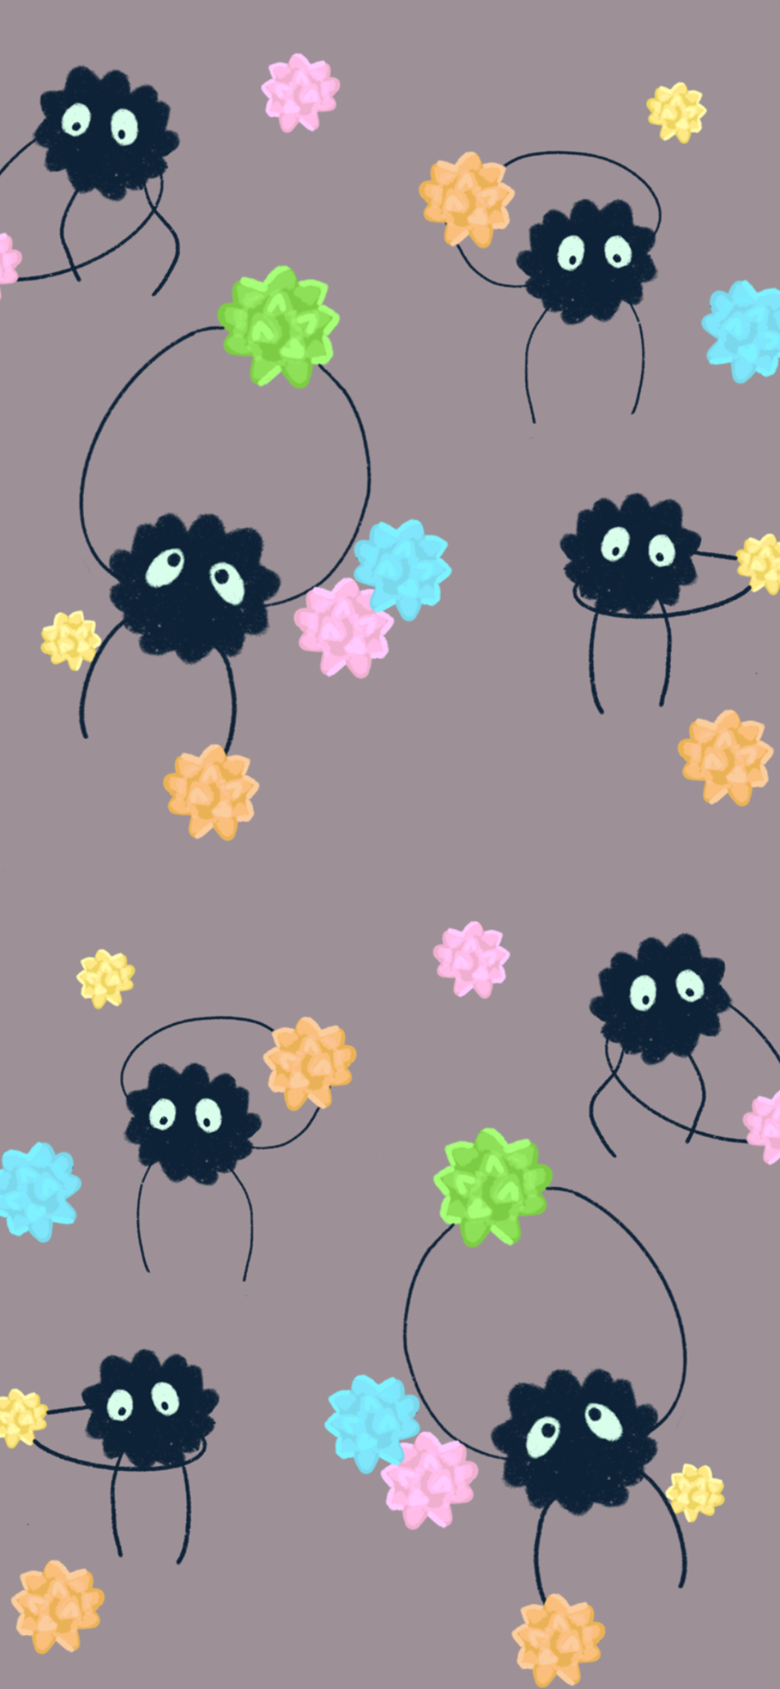 Soot Sprite Wallpaper's Ko Fi Shop Fi ❤️ Where Creators Get Support From Fans Through Donations, Memberships, Shop Sales And More! The Original 'Buy Me A Coffee' Page